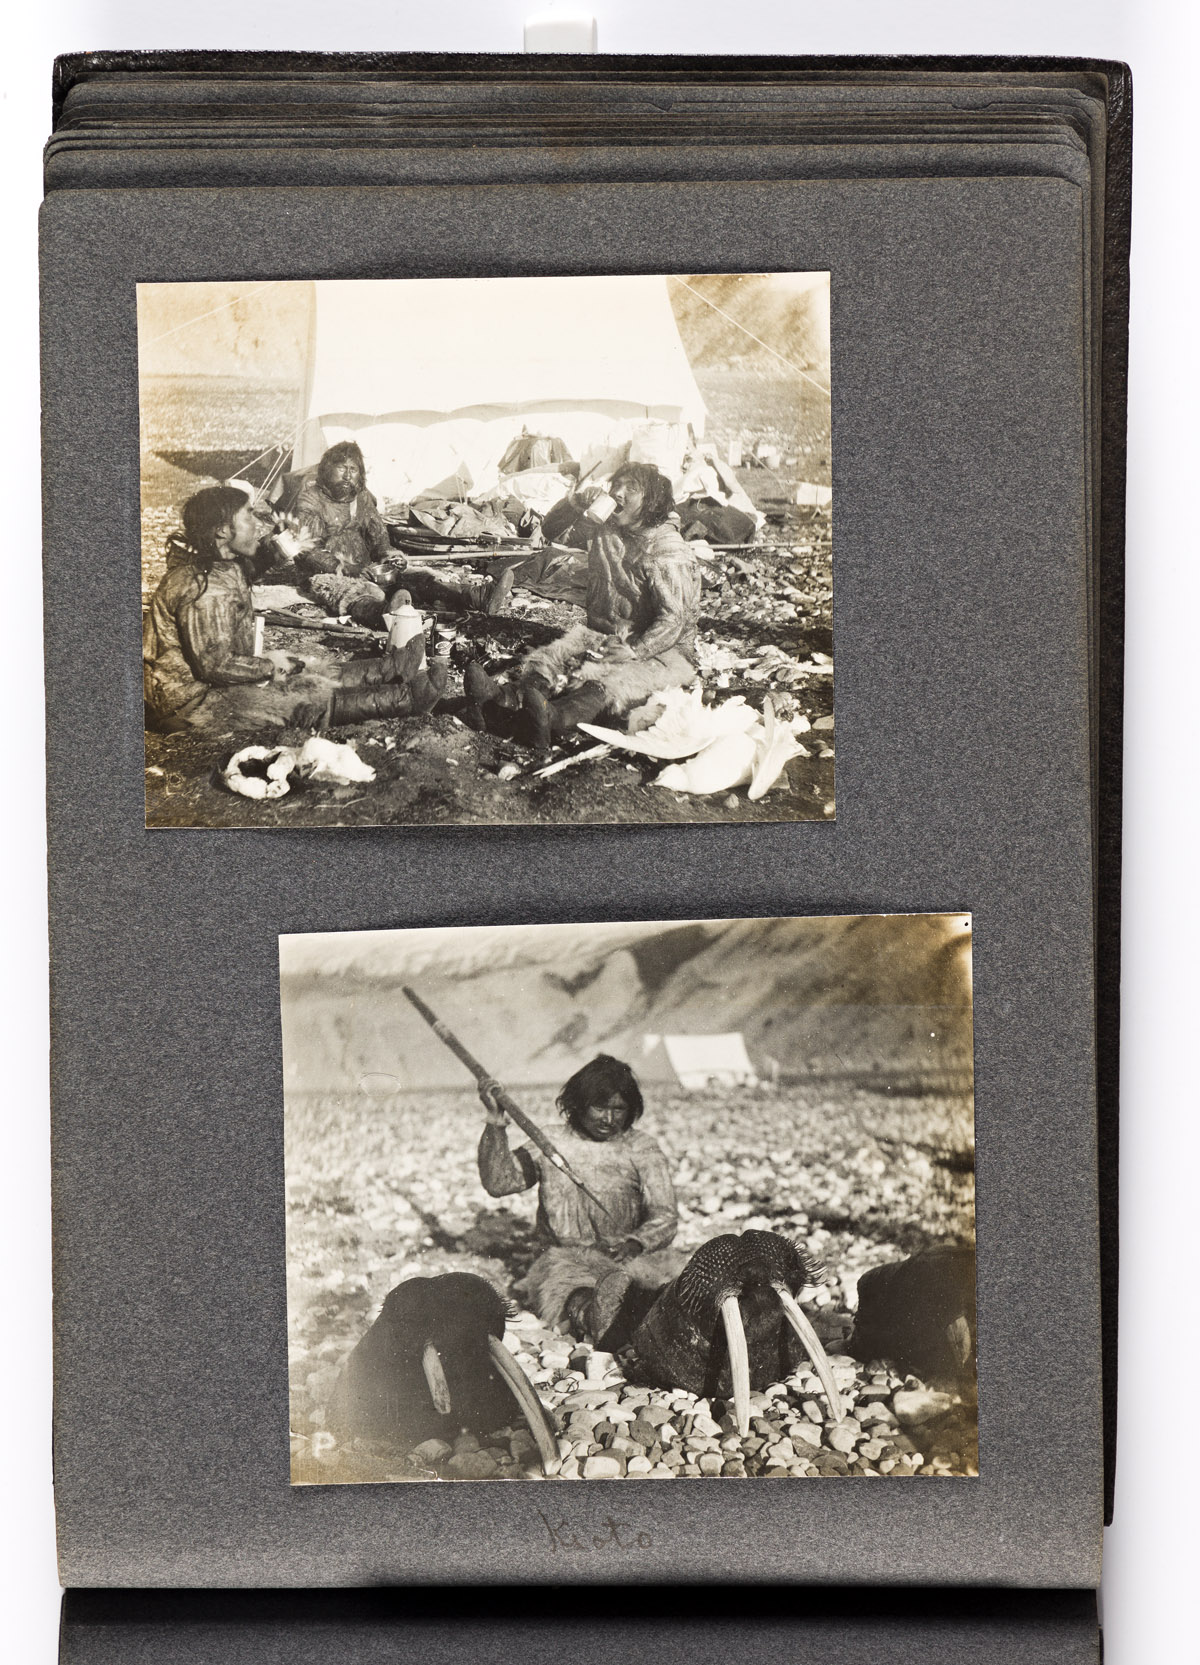 (ARCTIC.) Photograph album from the 1899 Peary Relief Expedition.